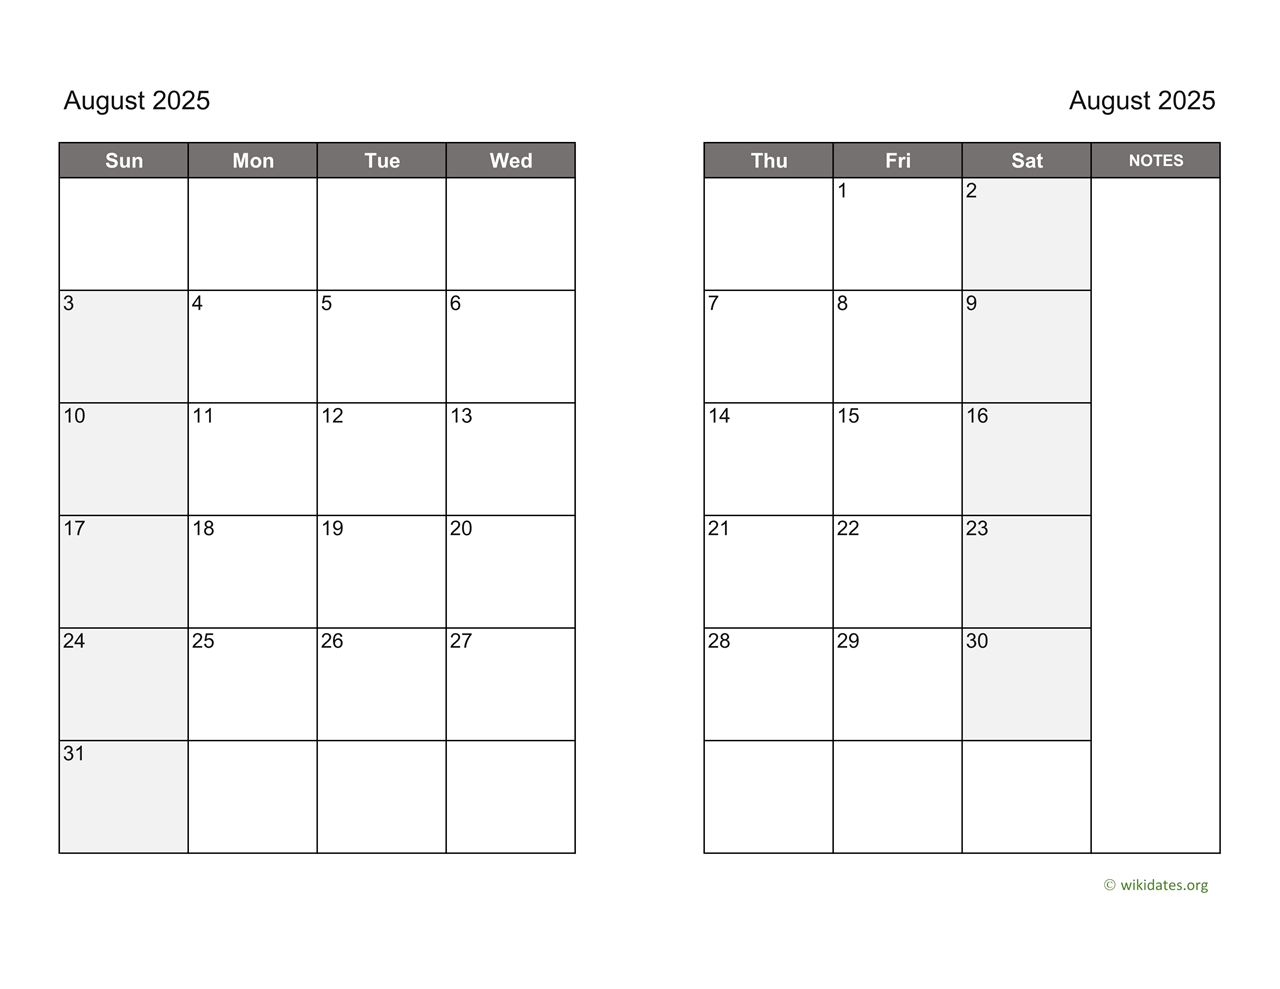 august-2025-calendar-on-two-pages-wikidates